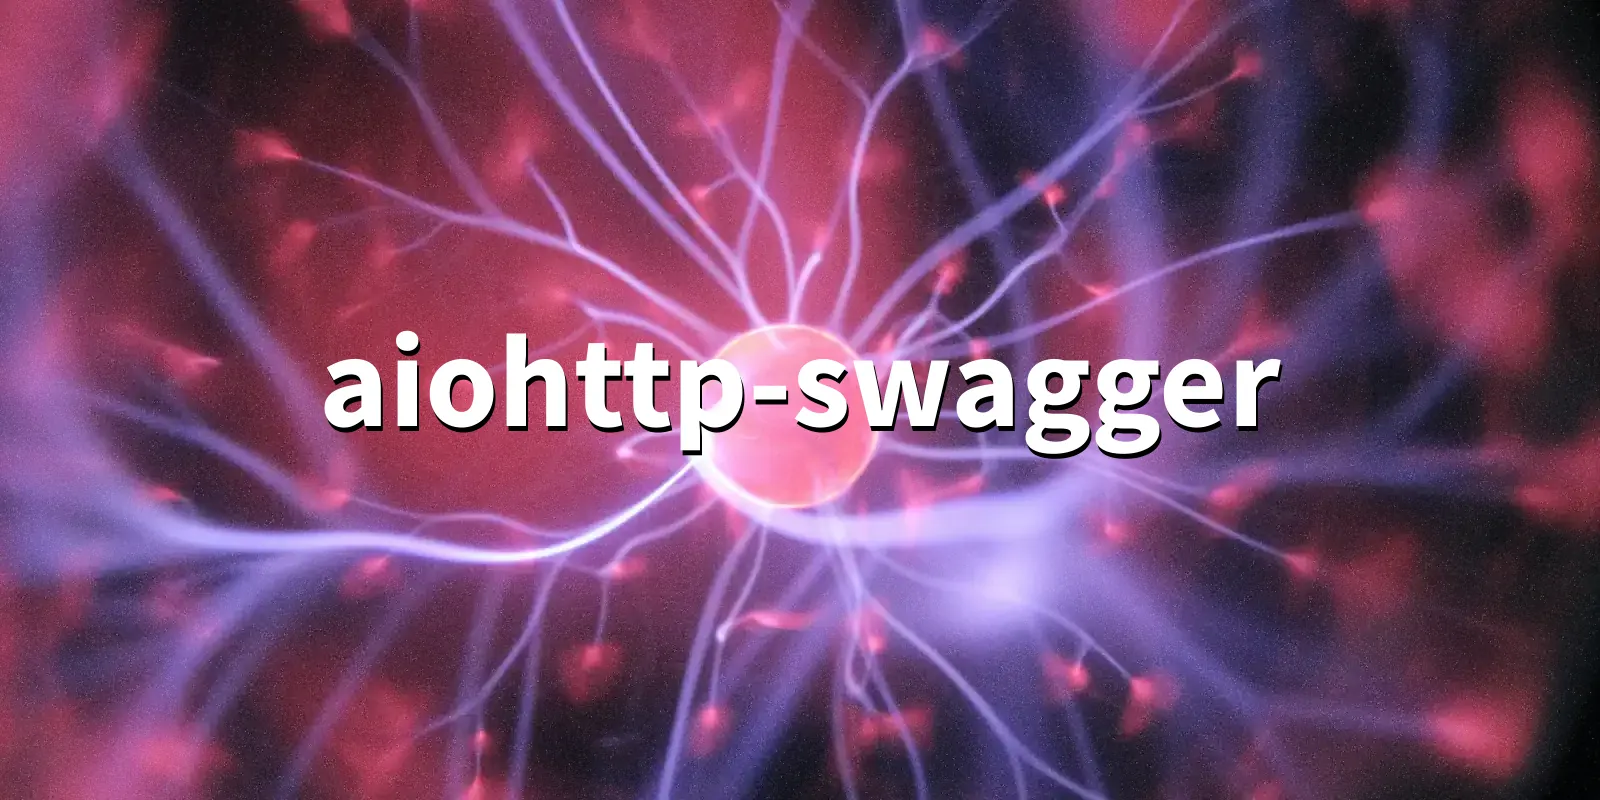 /pkg/a/aiohttp-swagger/aiohttp-swagger-banner.webp